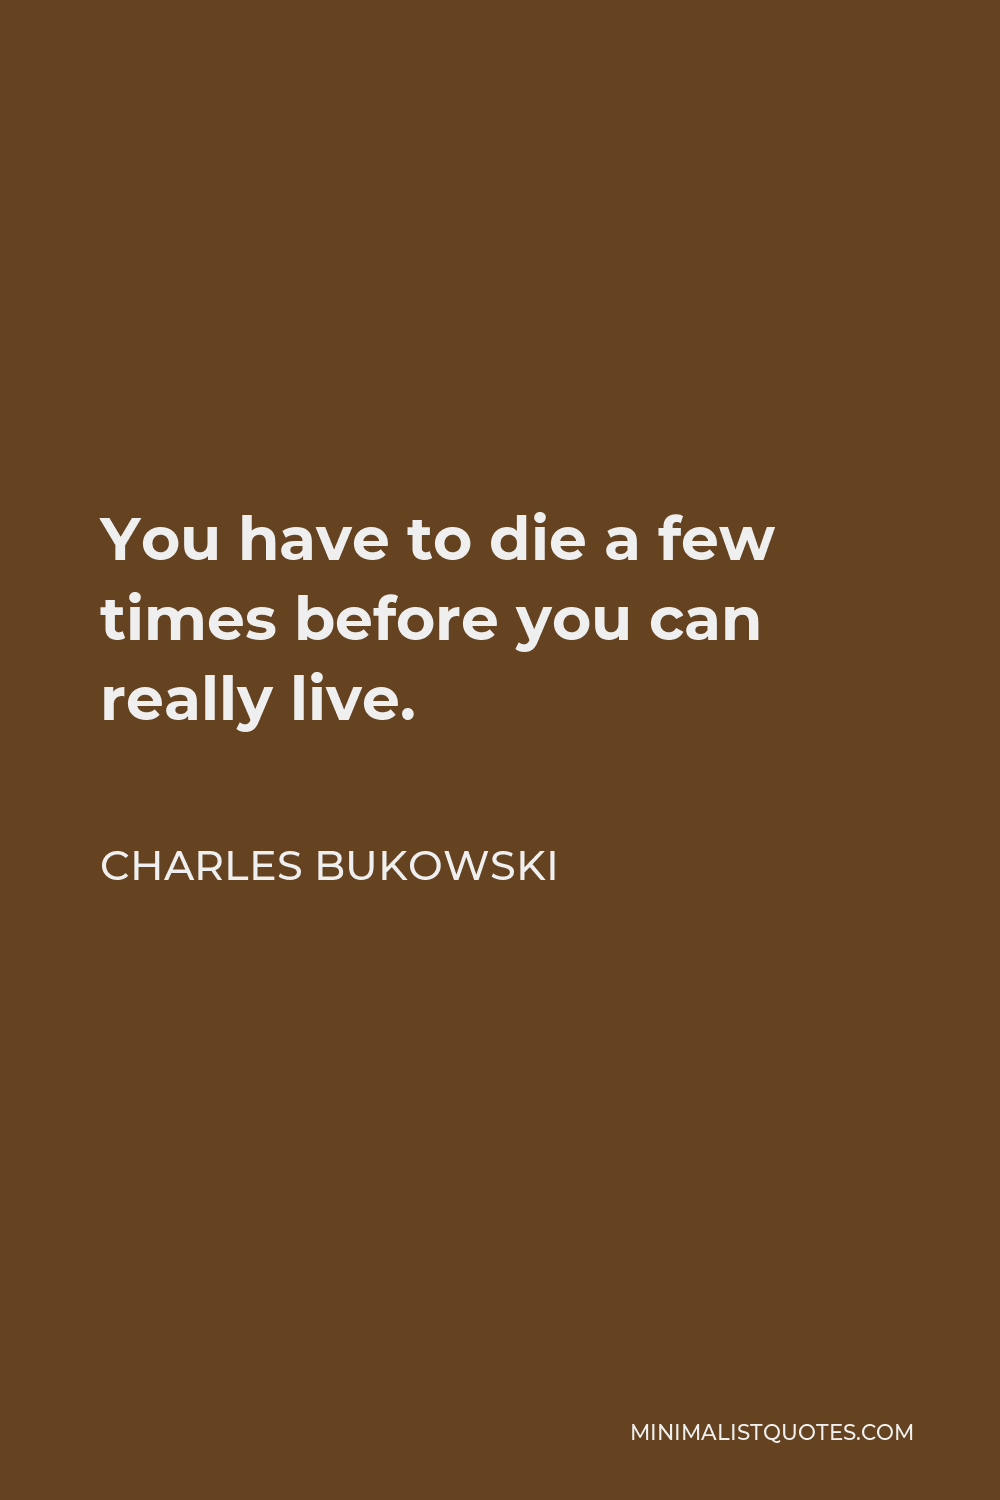 Charles Bukowski Quote - You have to die a few times before you can really live.